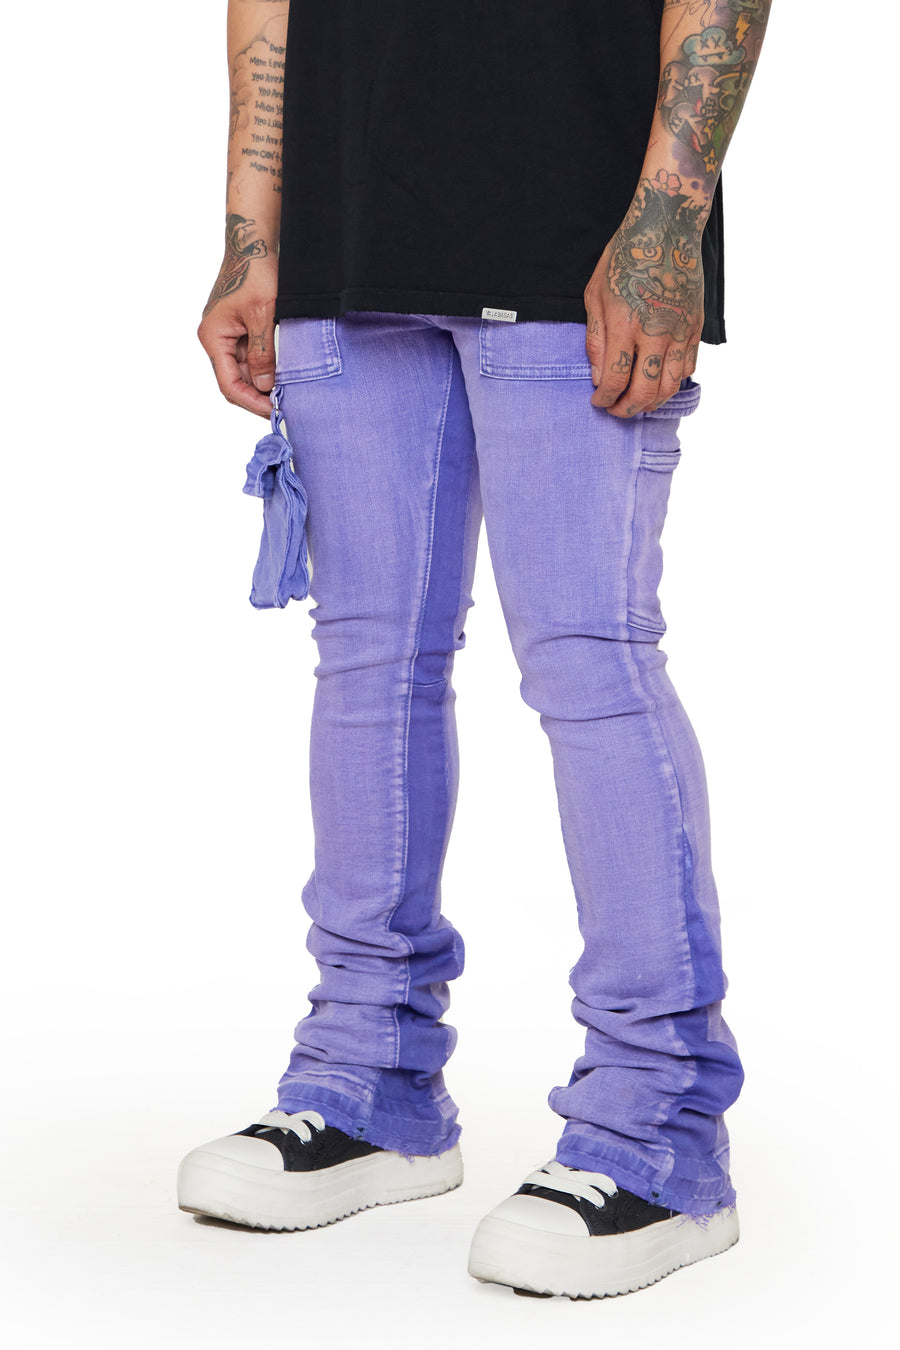 “SMOOTH” PURPLE-BLUE STACKED FLARE JEAN